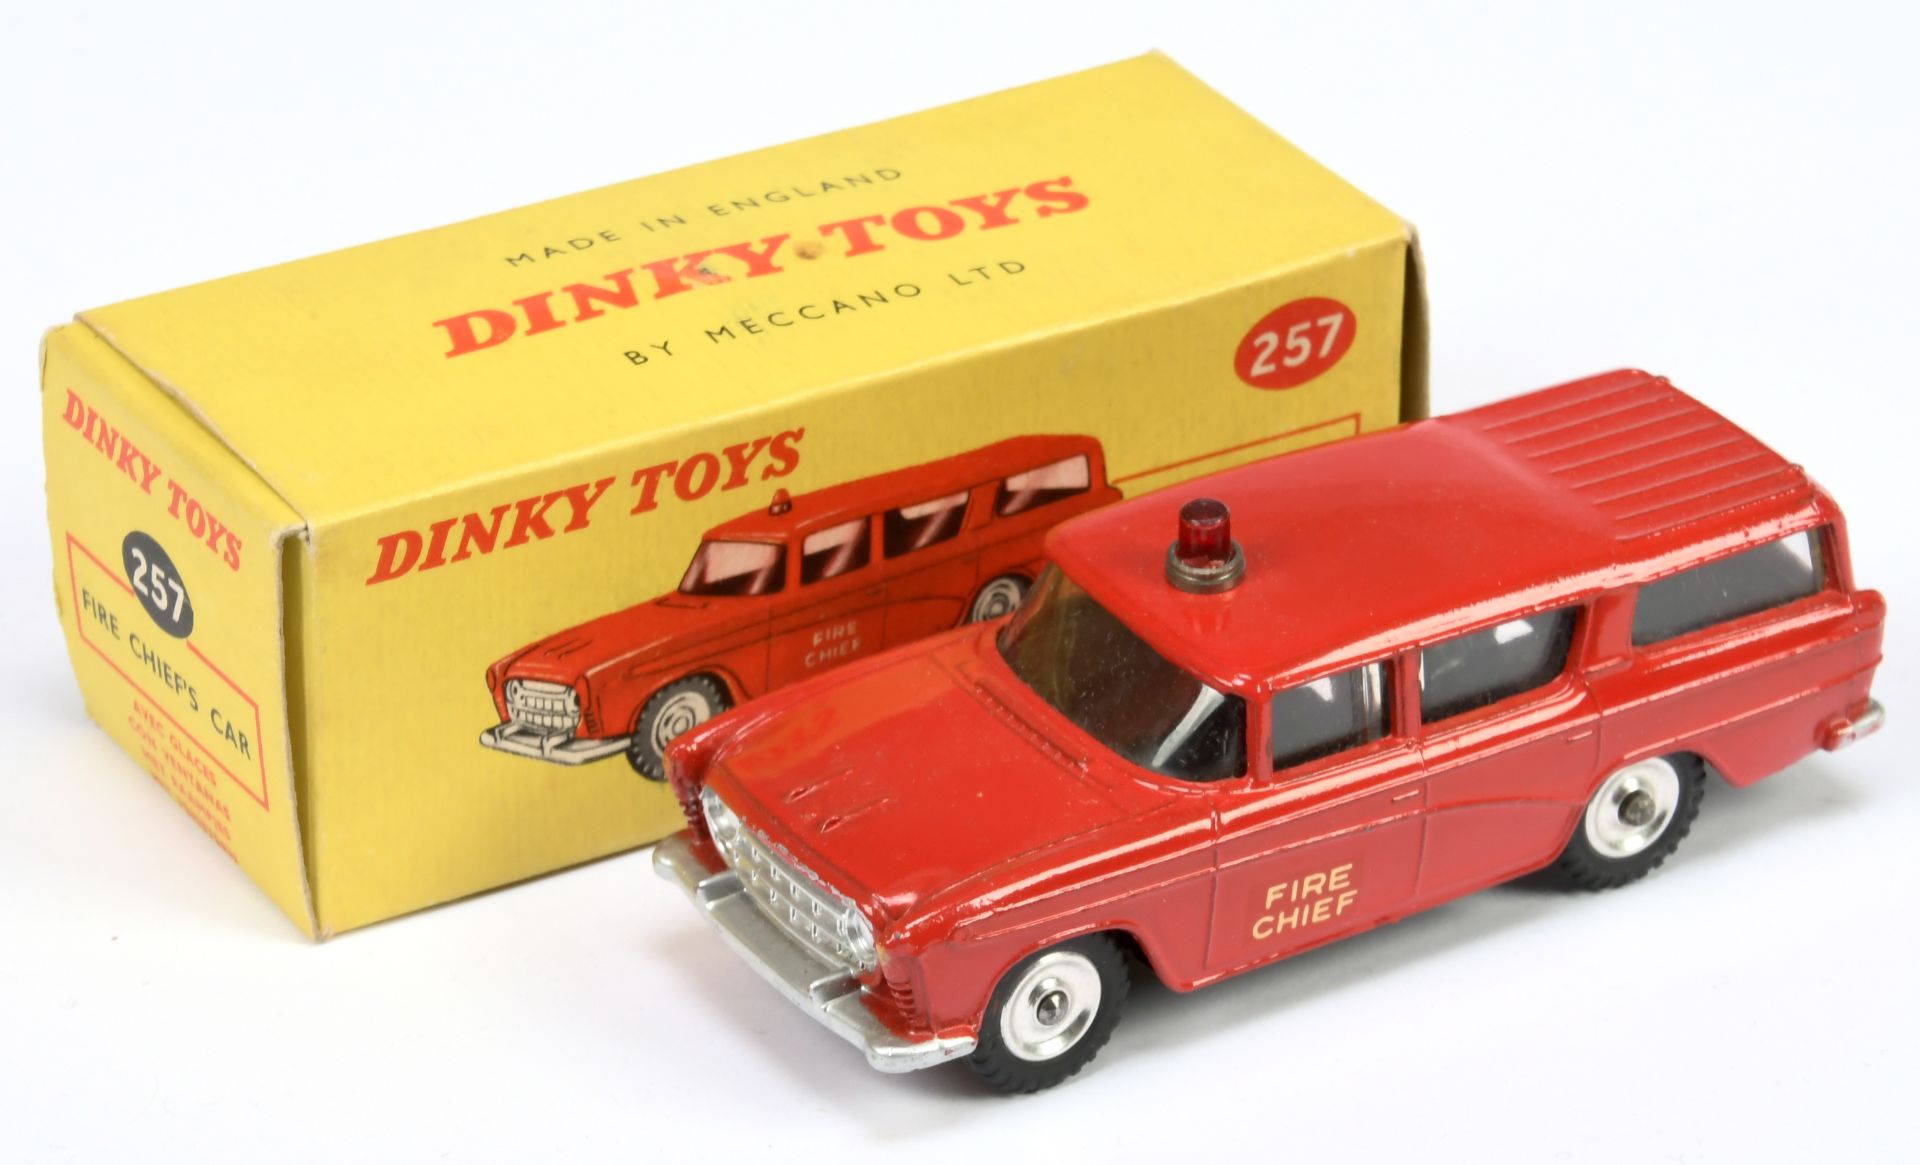 Dinky 257 Nash Rambler "Fire Chief" Car - Red body and roof light, silver trim and chrome spun hubs 